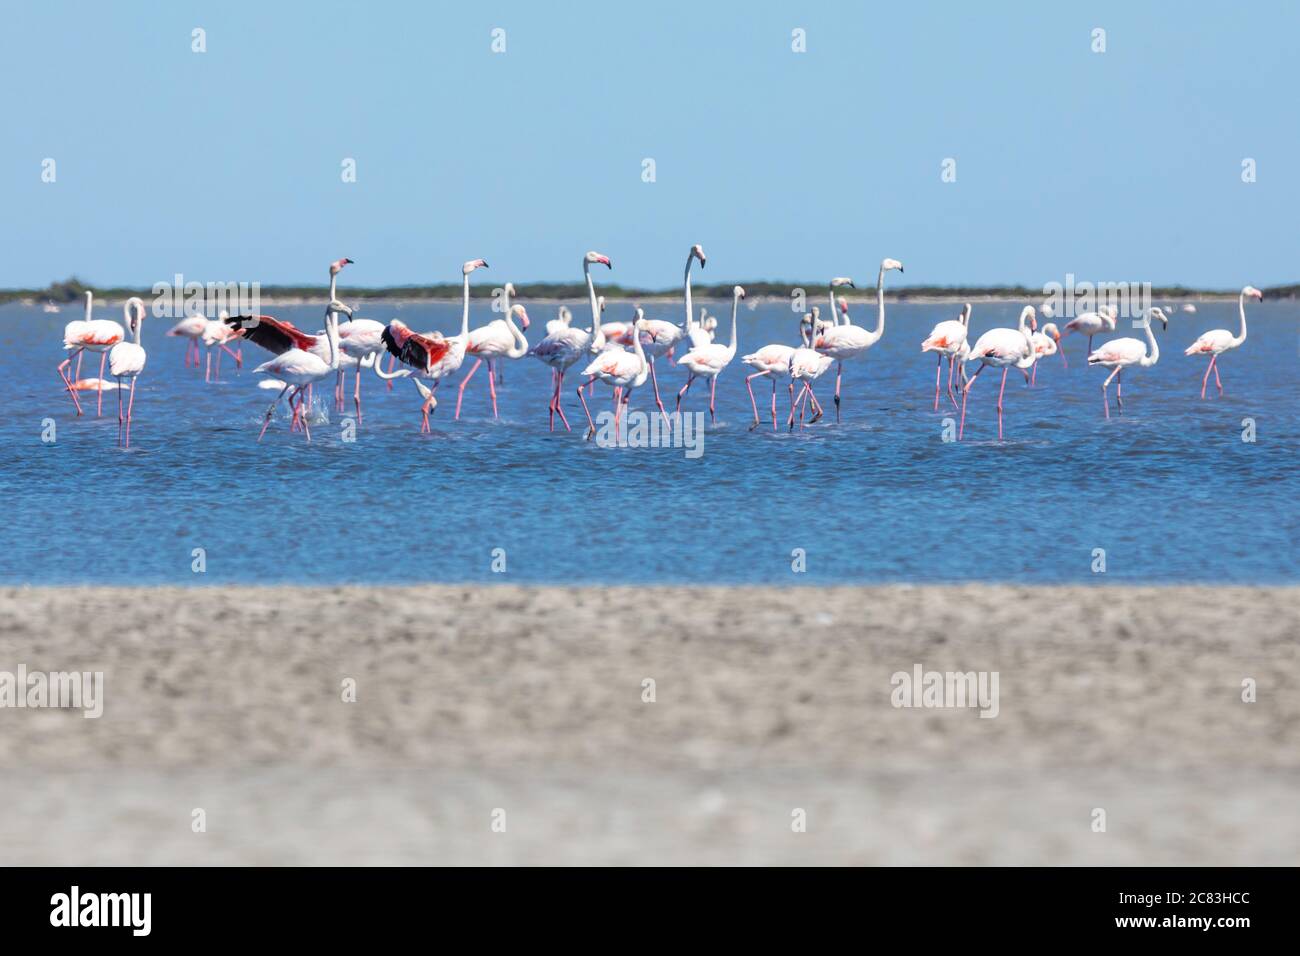 Close up of a french beach full of wild flamingos standing in shallow water, against a blue summer sky Stock Photo